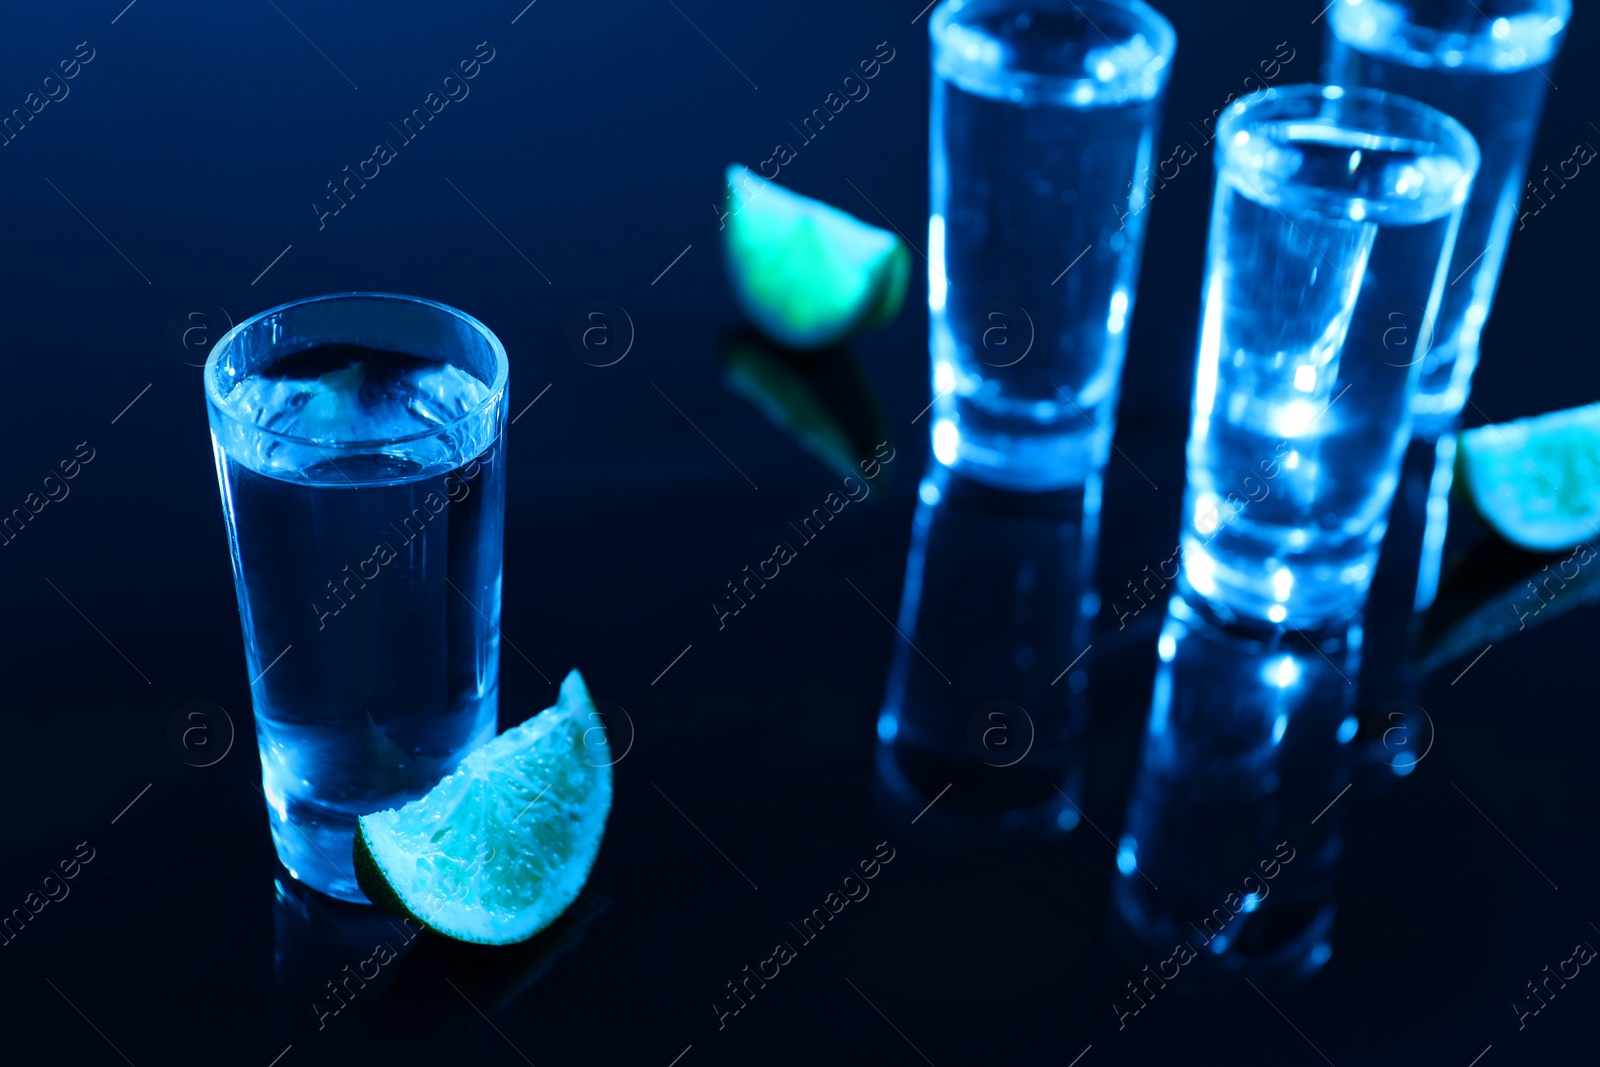 Photo of Shot glasses of vodka with lime slices on dark background